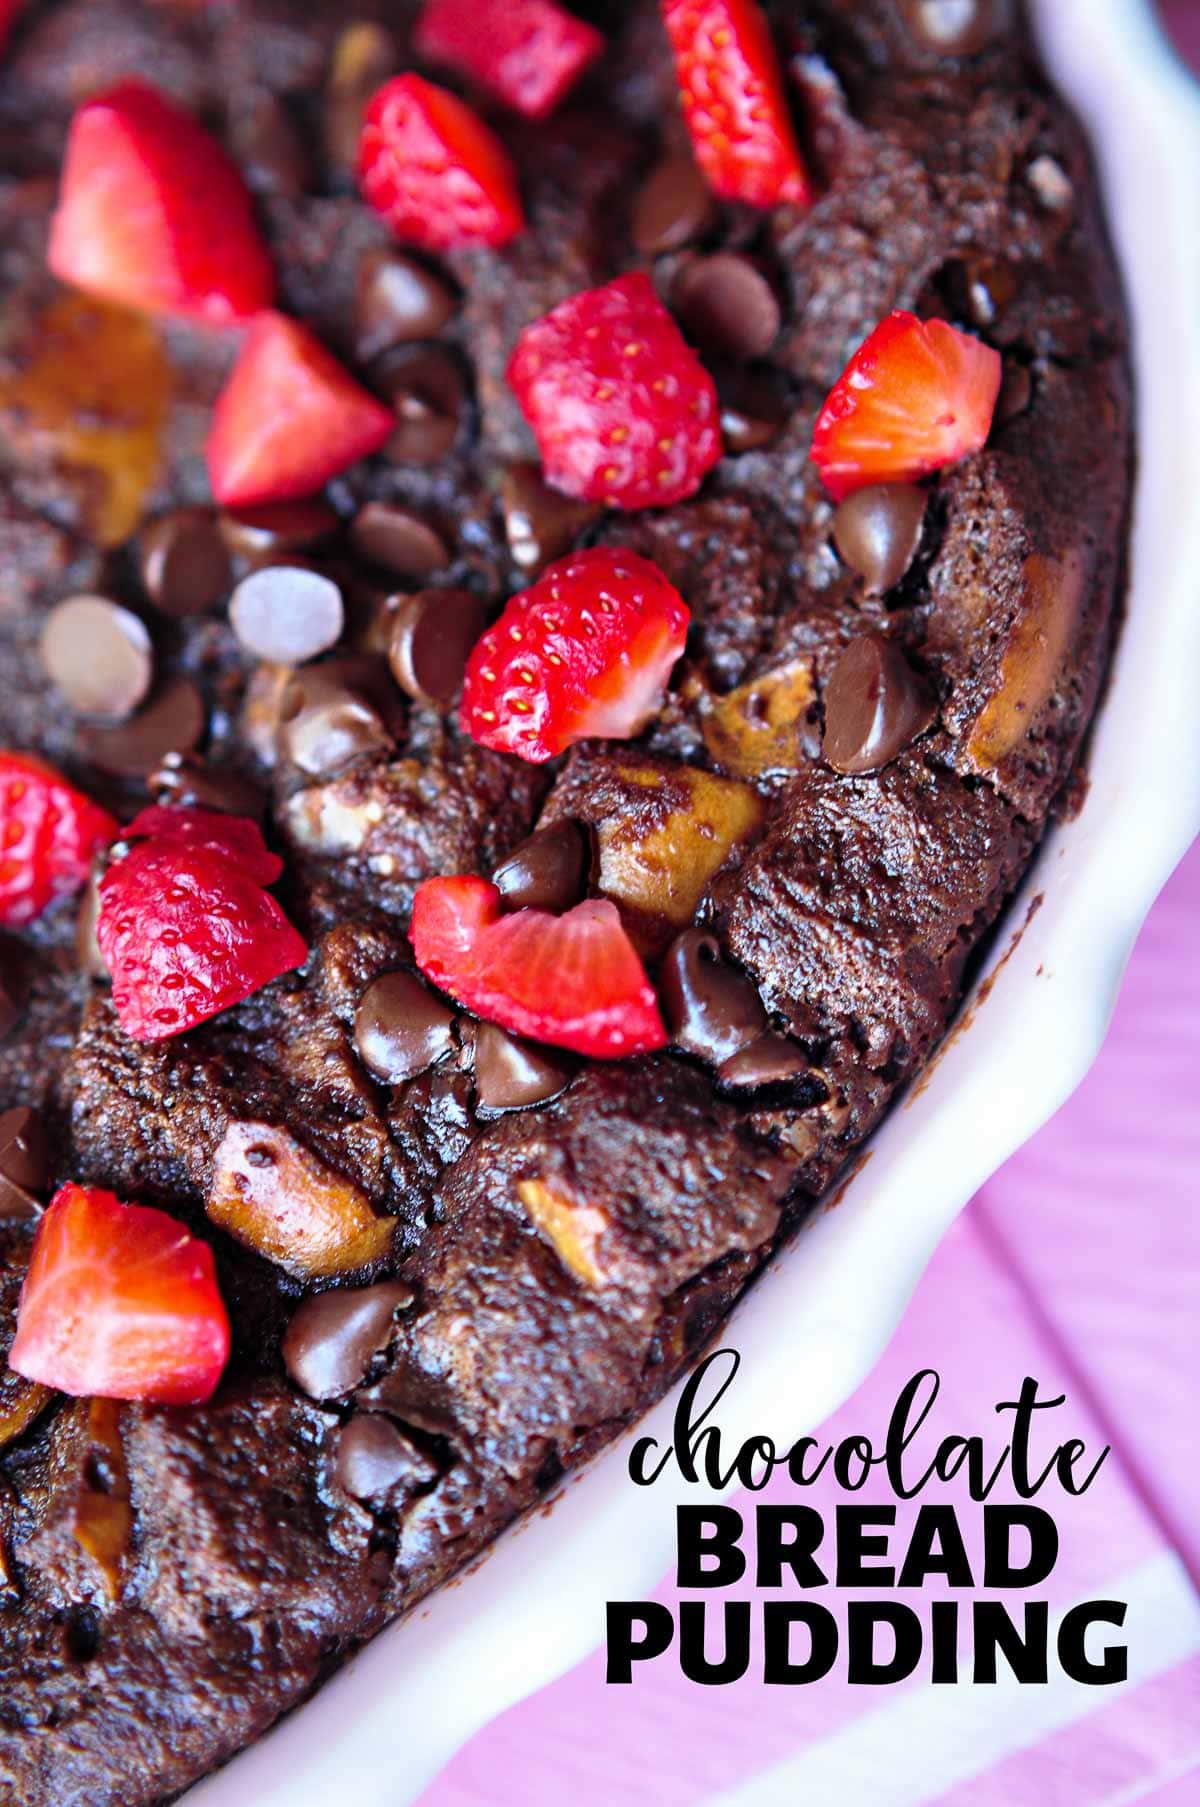 Chocolate Bread Pudding with text overlay.